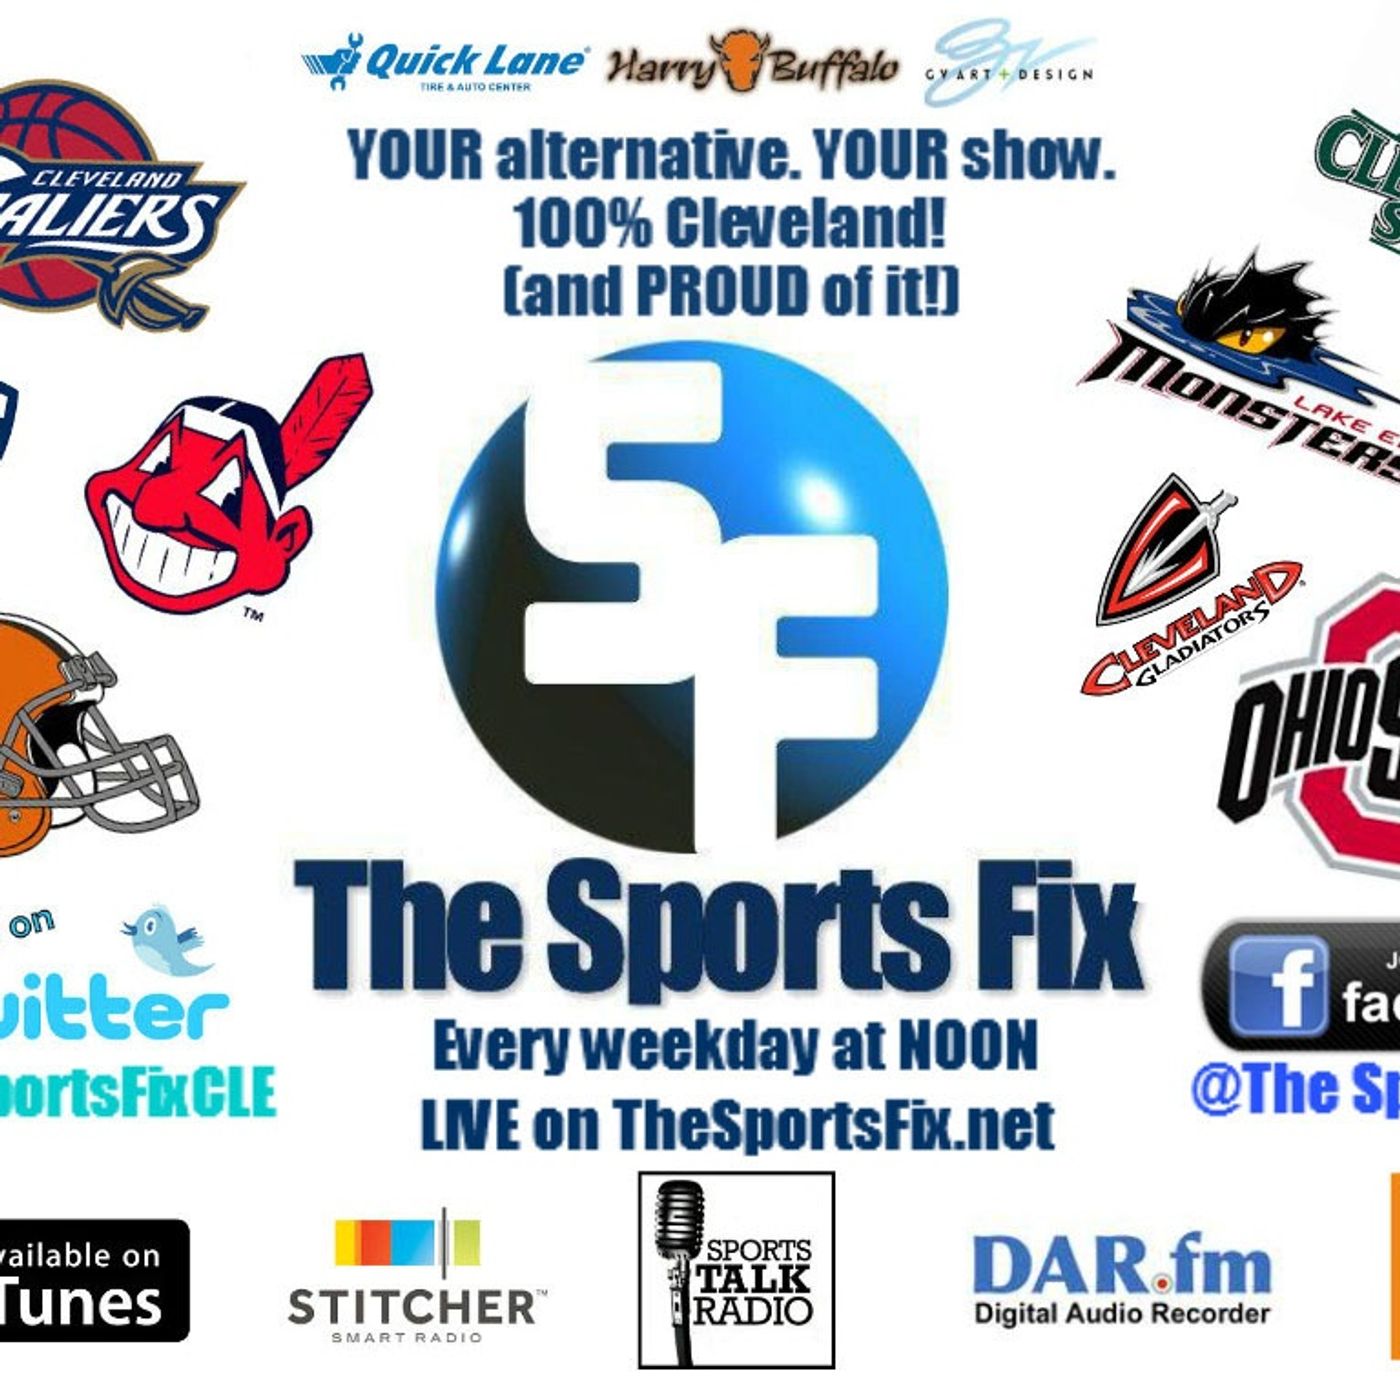 The Sports Fix - Weds Aug 3, 2016